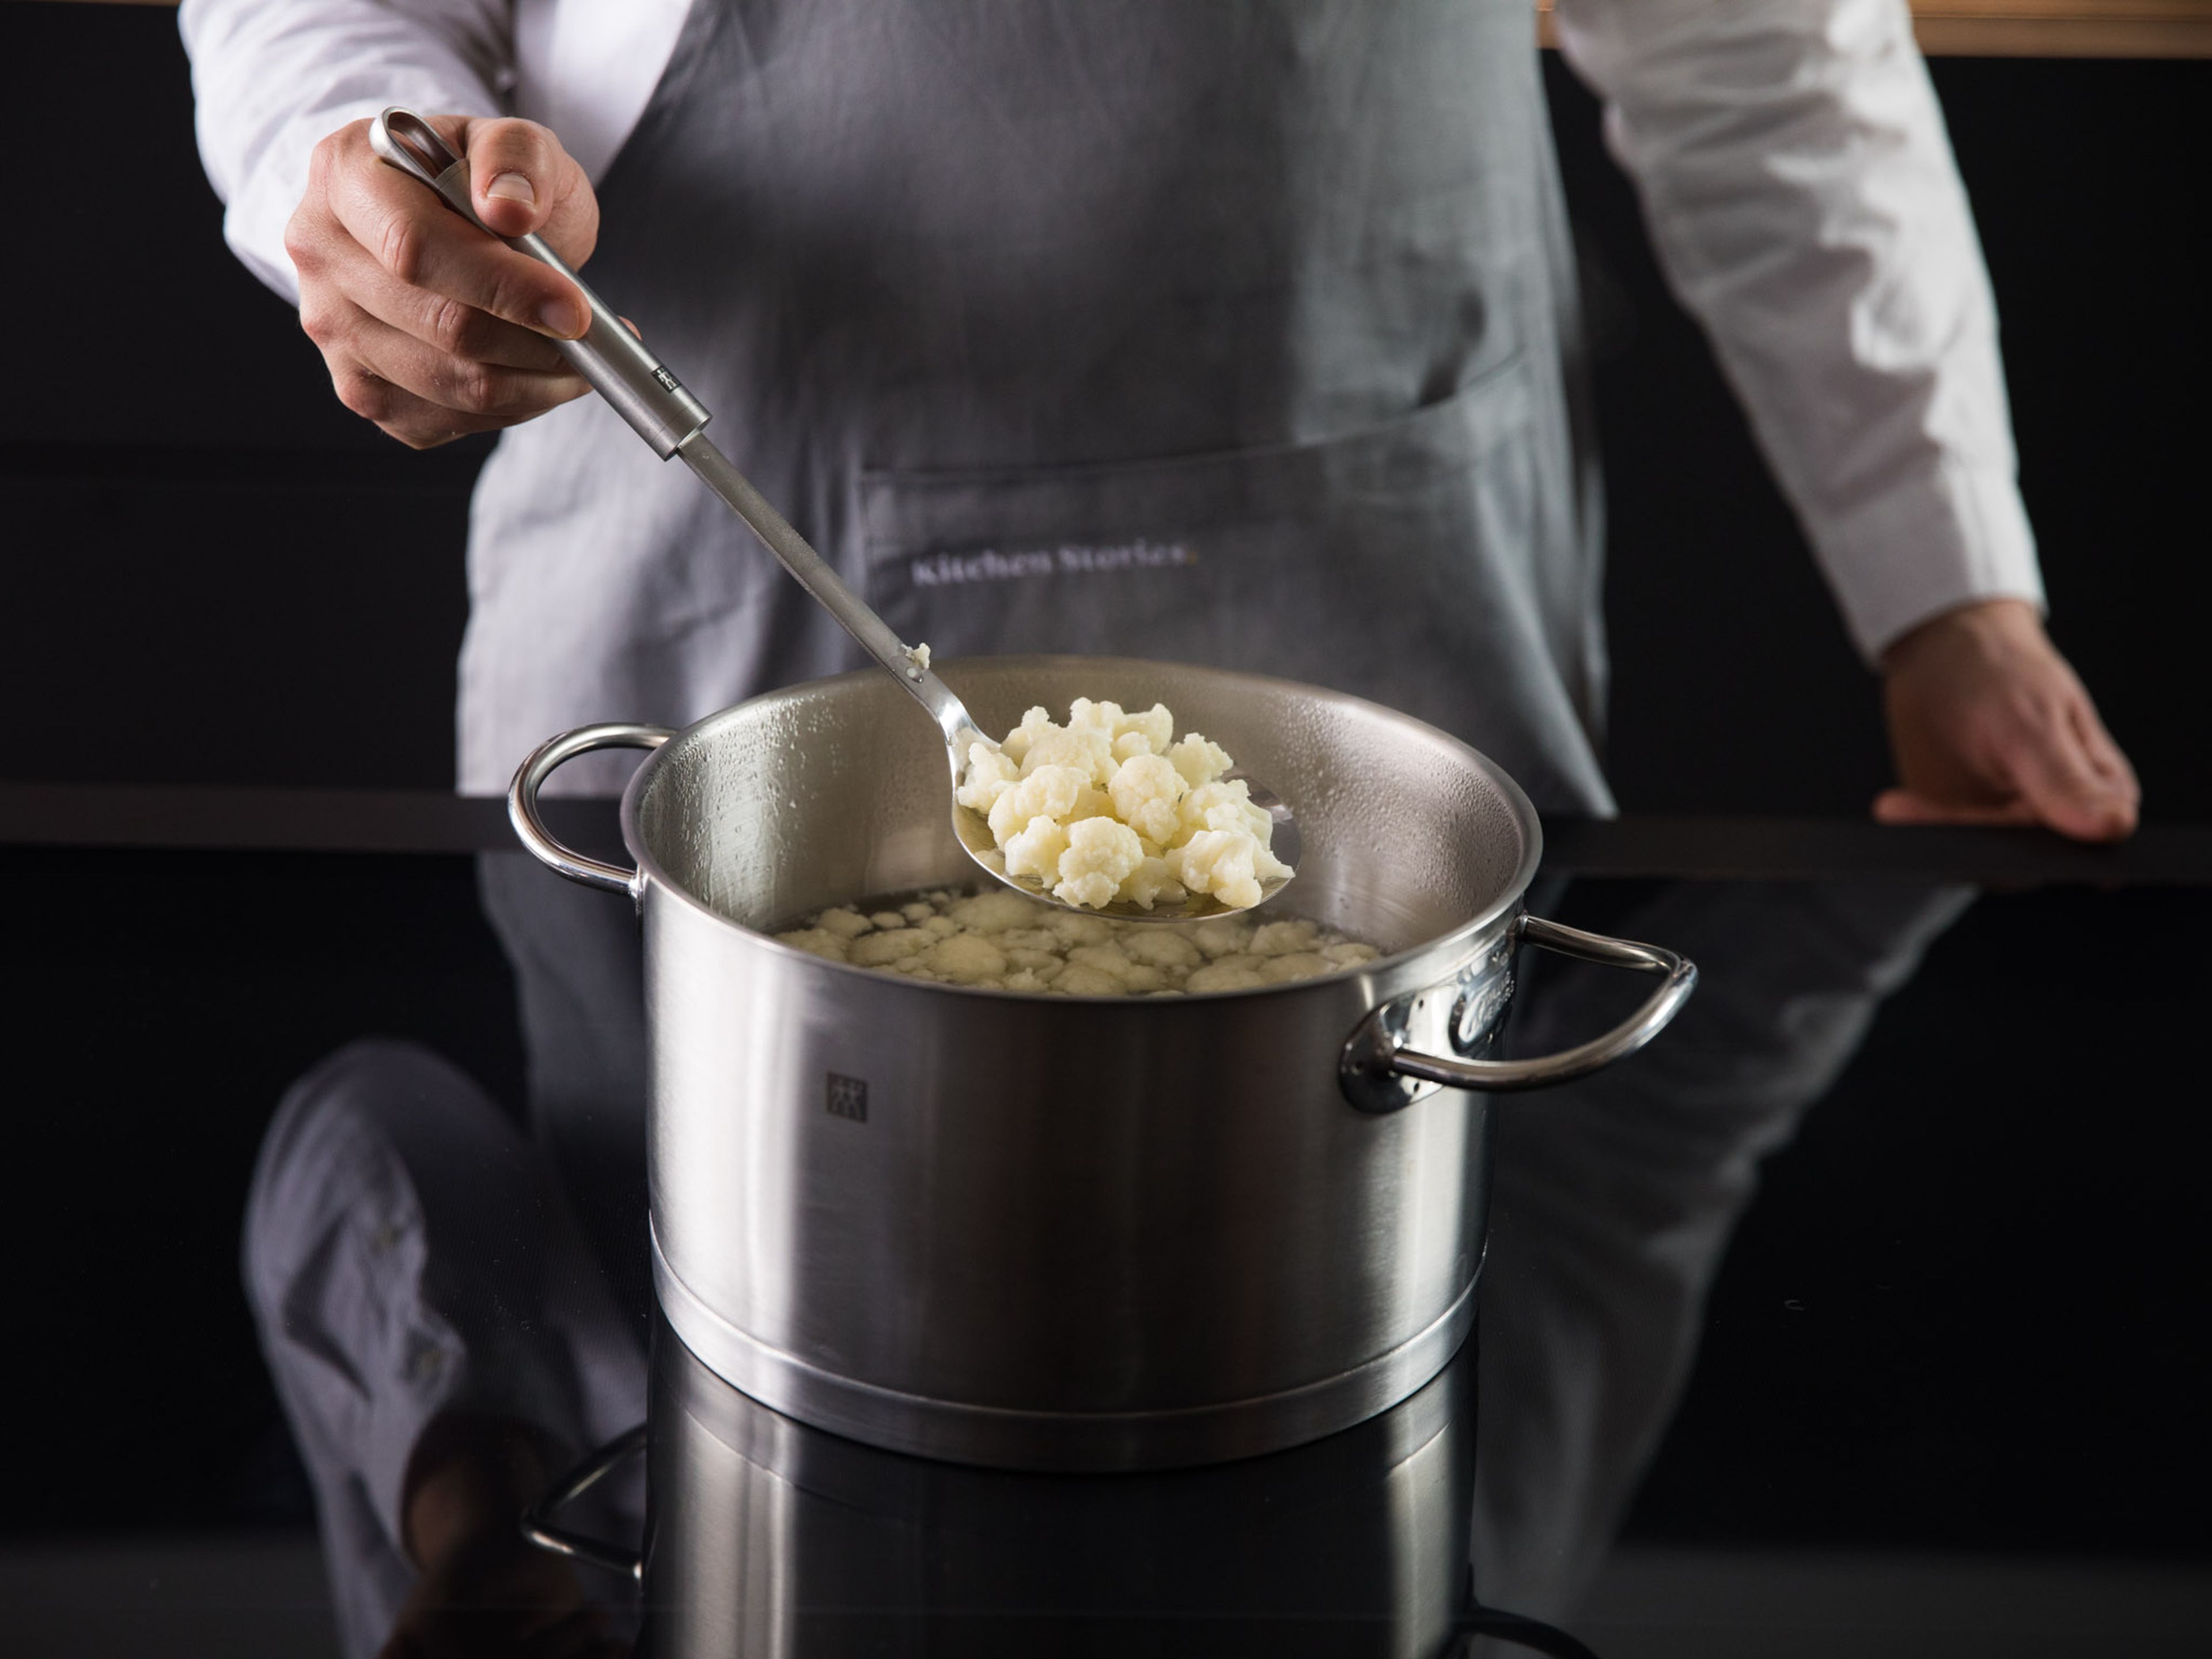 Cut cauliflower into small florets. Bring a pot of salted water to a boil, add cauliflower florets and cook for approx. 8-10 min. Transfer cauliflower florets to a bowl. Reserve the blanching water and set aside.